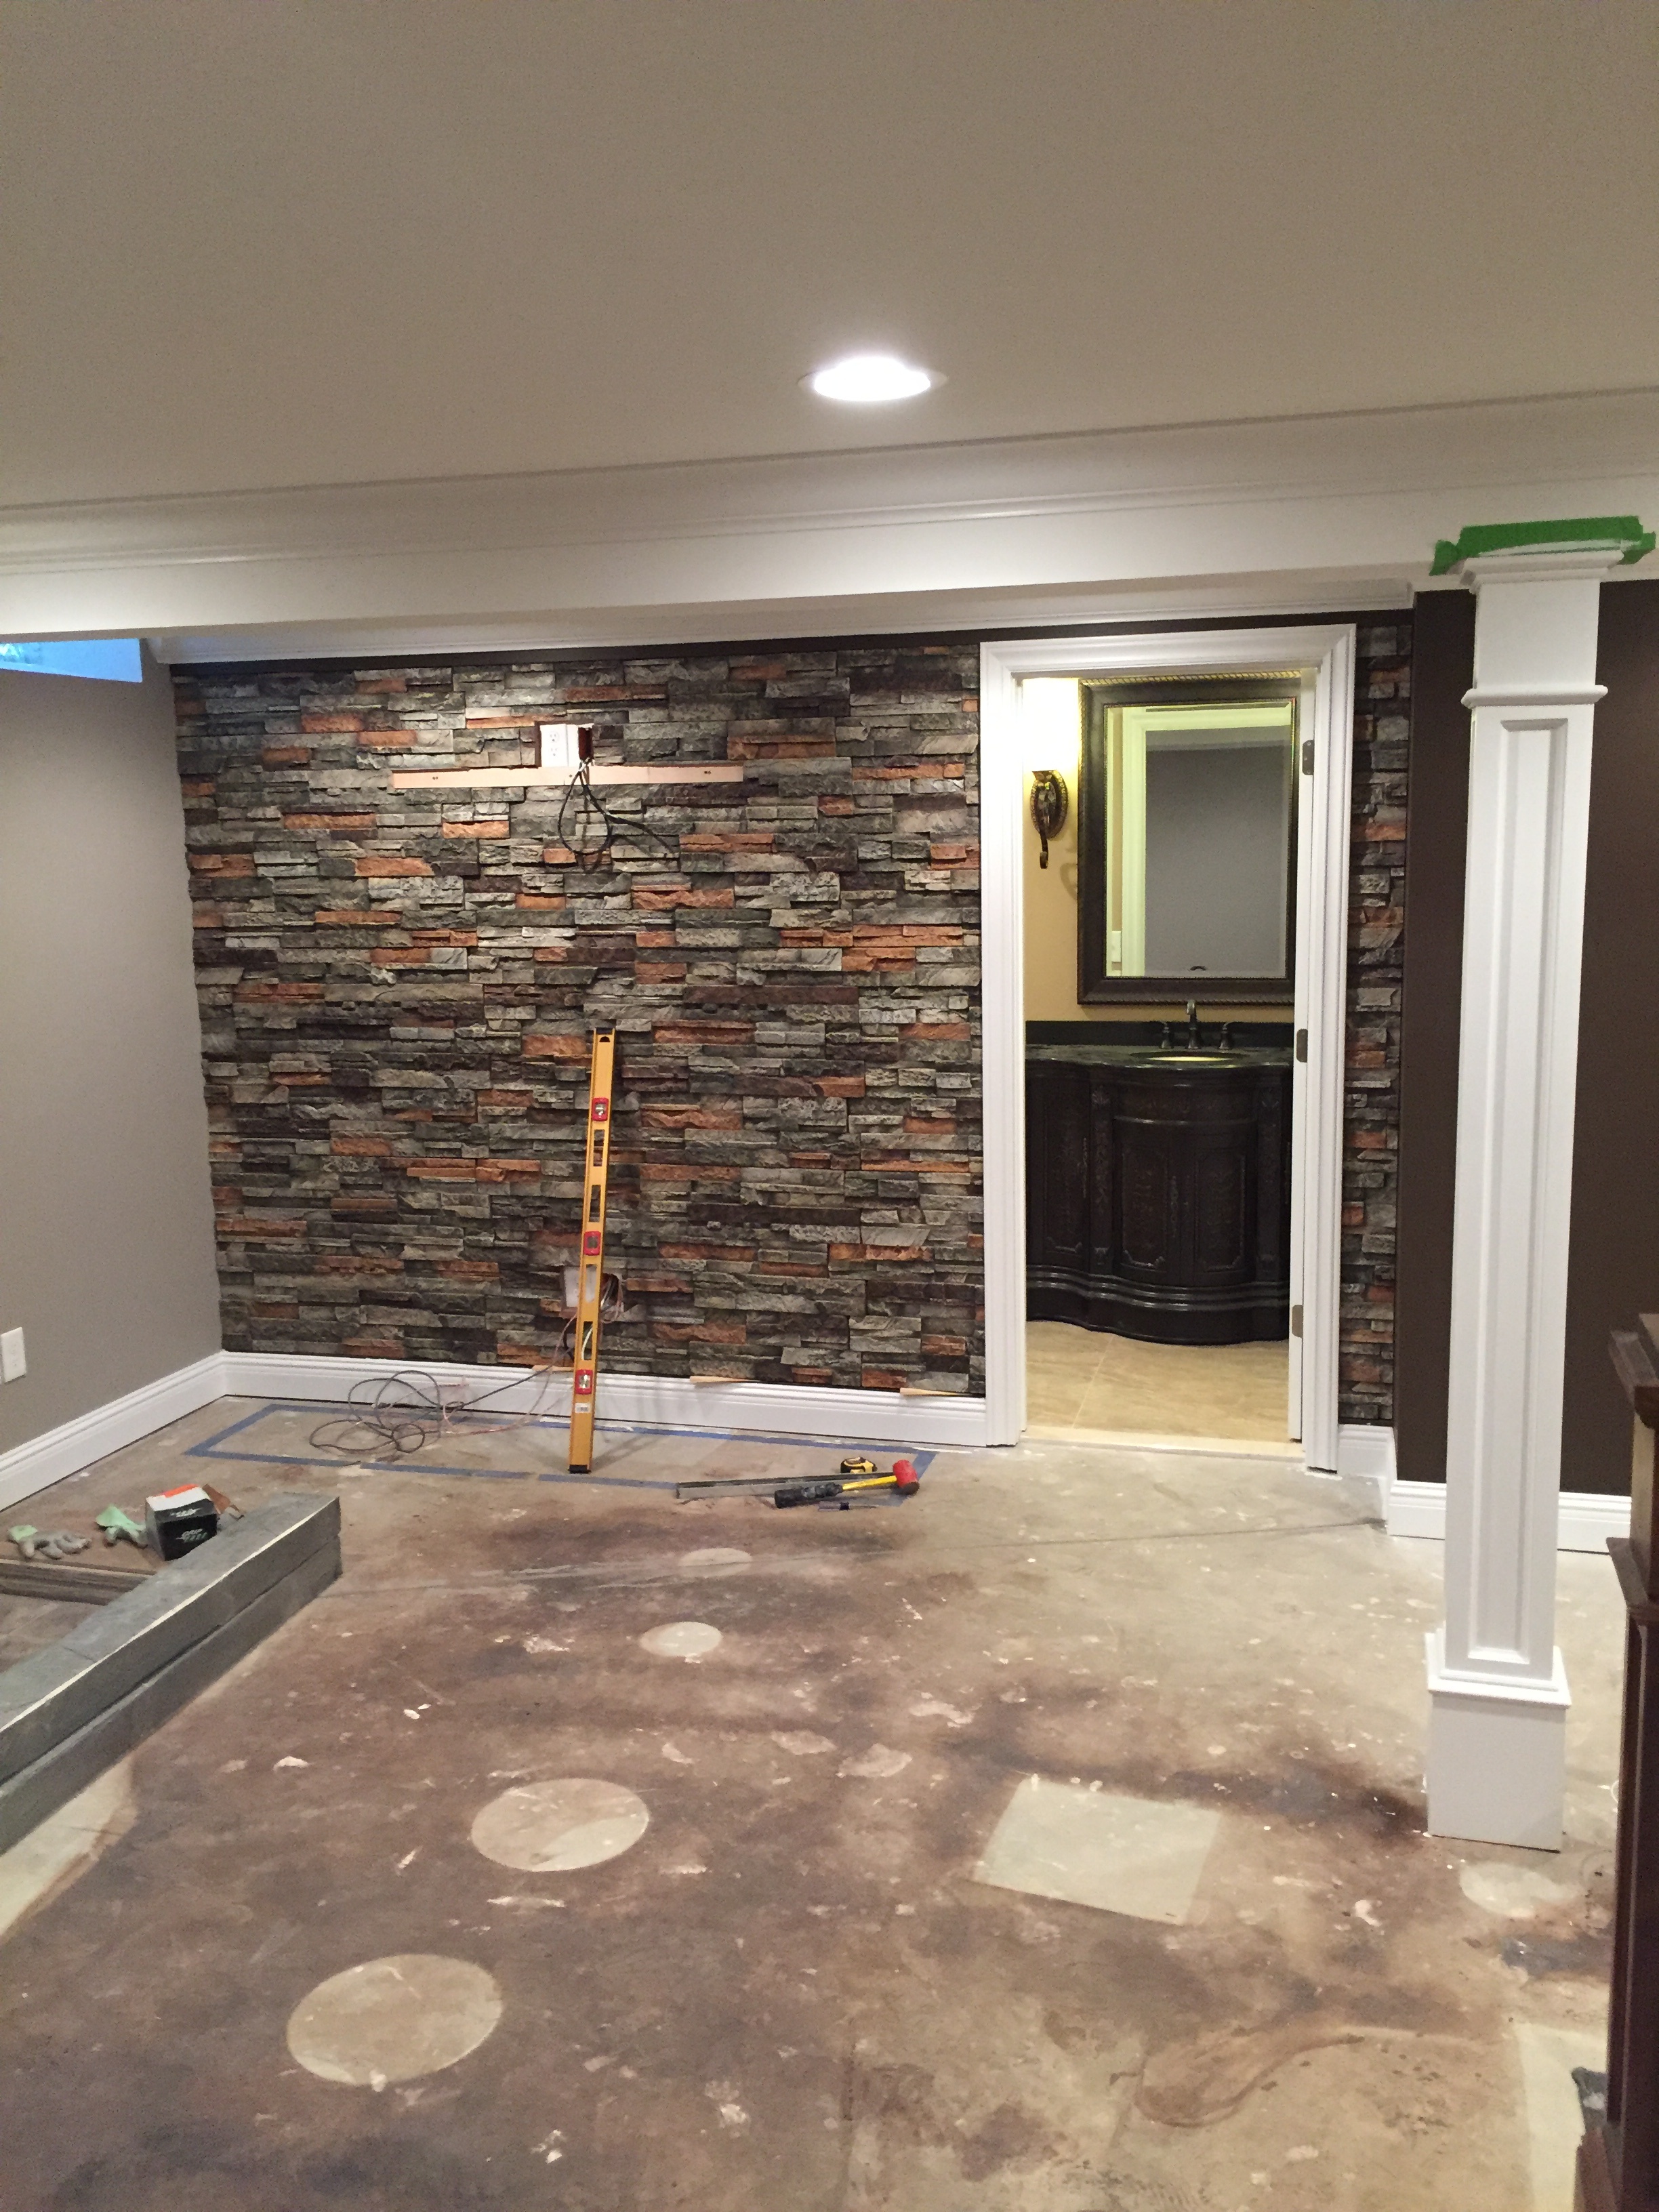 Basement Wall Ideas: Check Out This 3 Hour Project - Barron Designs